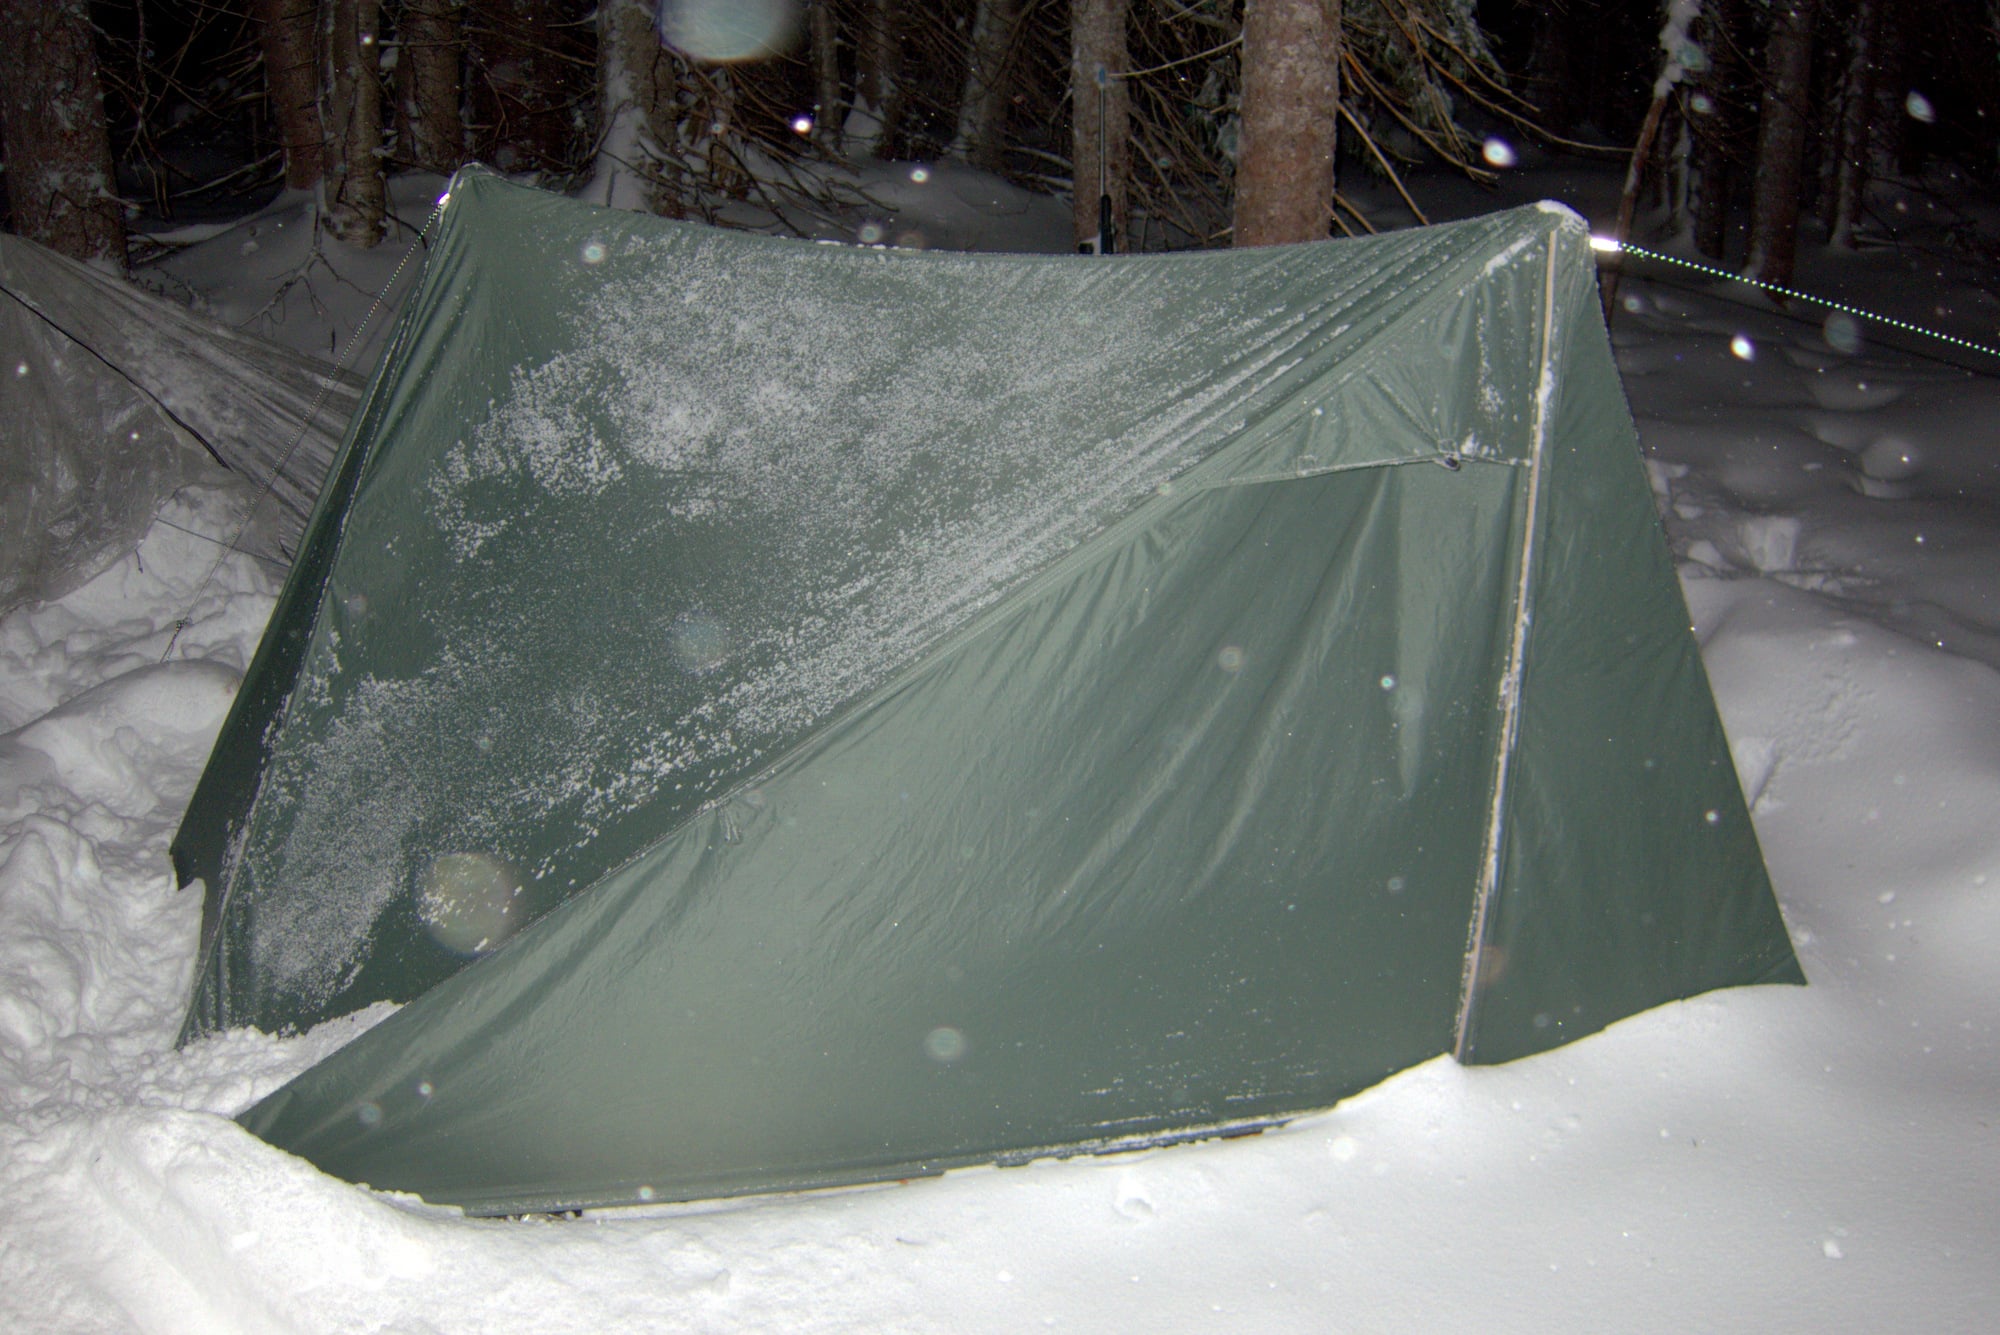 The Route Tent Tent after a 4-inch storm